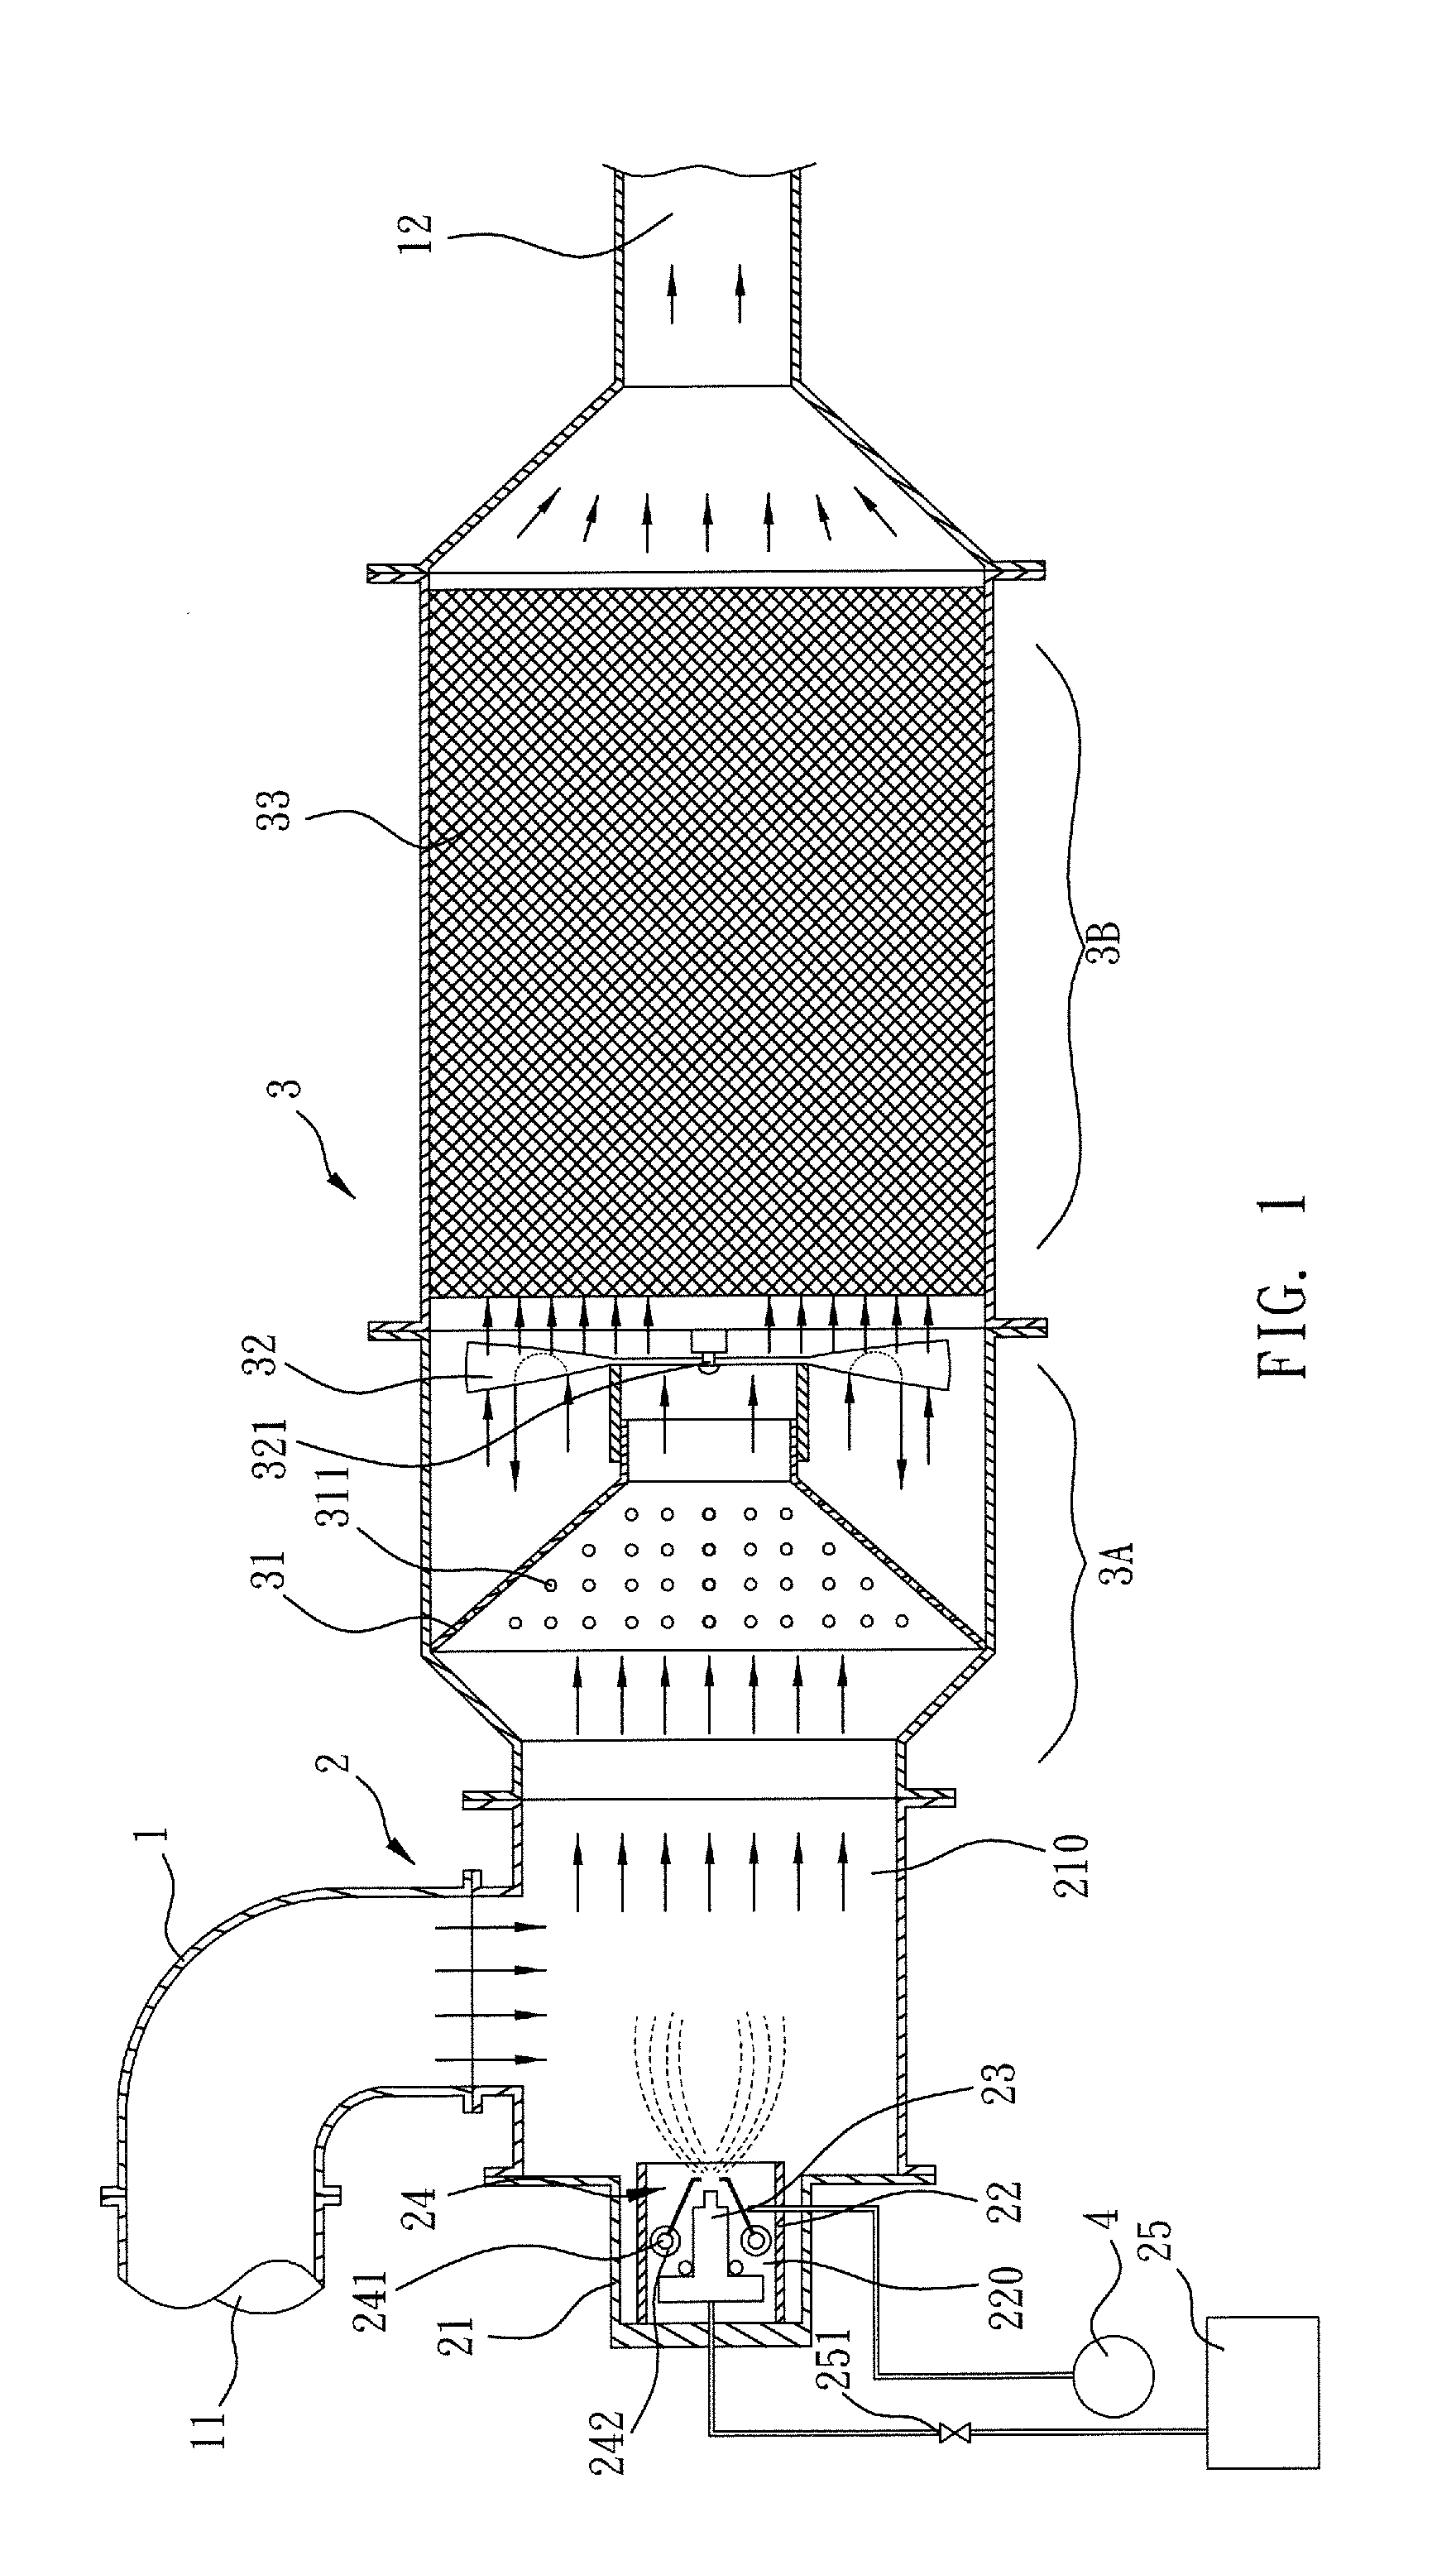 Black smoke burning and purifying apparatus for vehicle exhaust